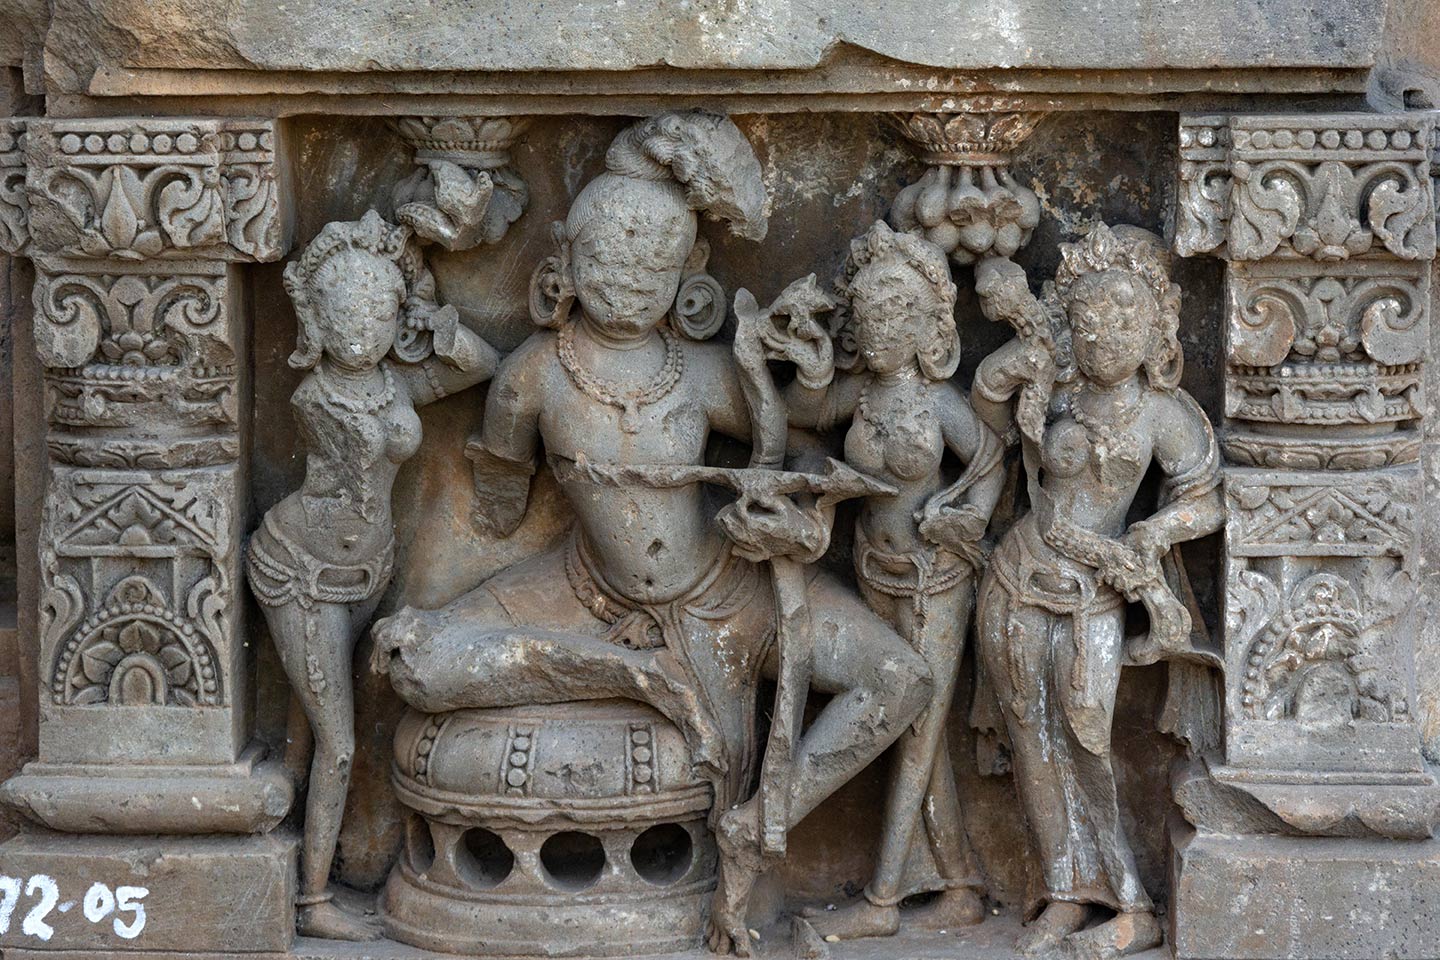 The central male figure is seated on a raised circular seat in the lalitasana pose, firing an arrow from a bow. Standing on his left are two female figures (faces defaced), looking towards him. The female on his immediate left is holding a flower in her right hand. The female to his far left is holding a floral scroll. The female figure on his right is damaged. A bunch of mangoes hang above them.